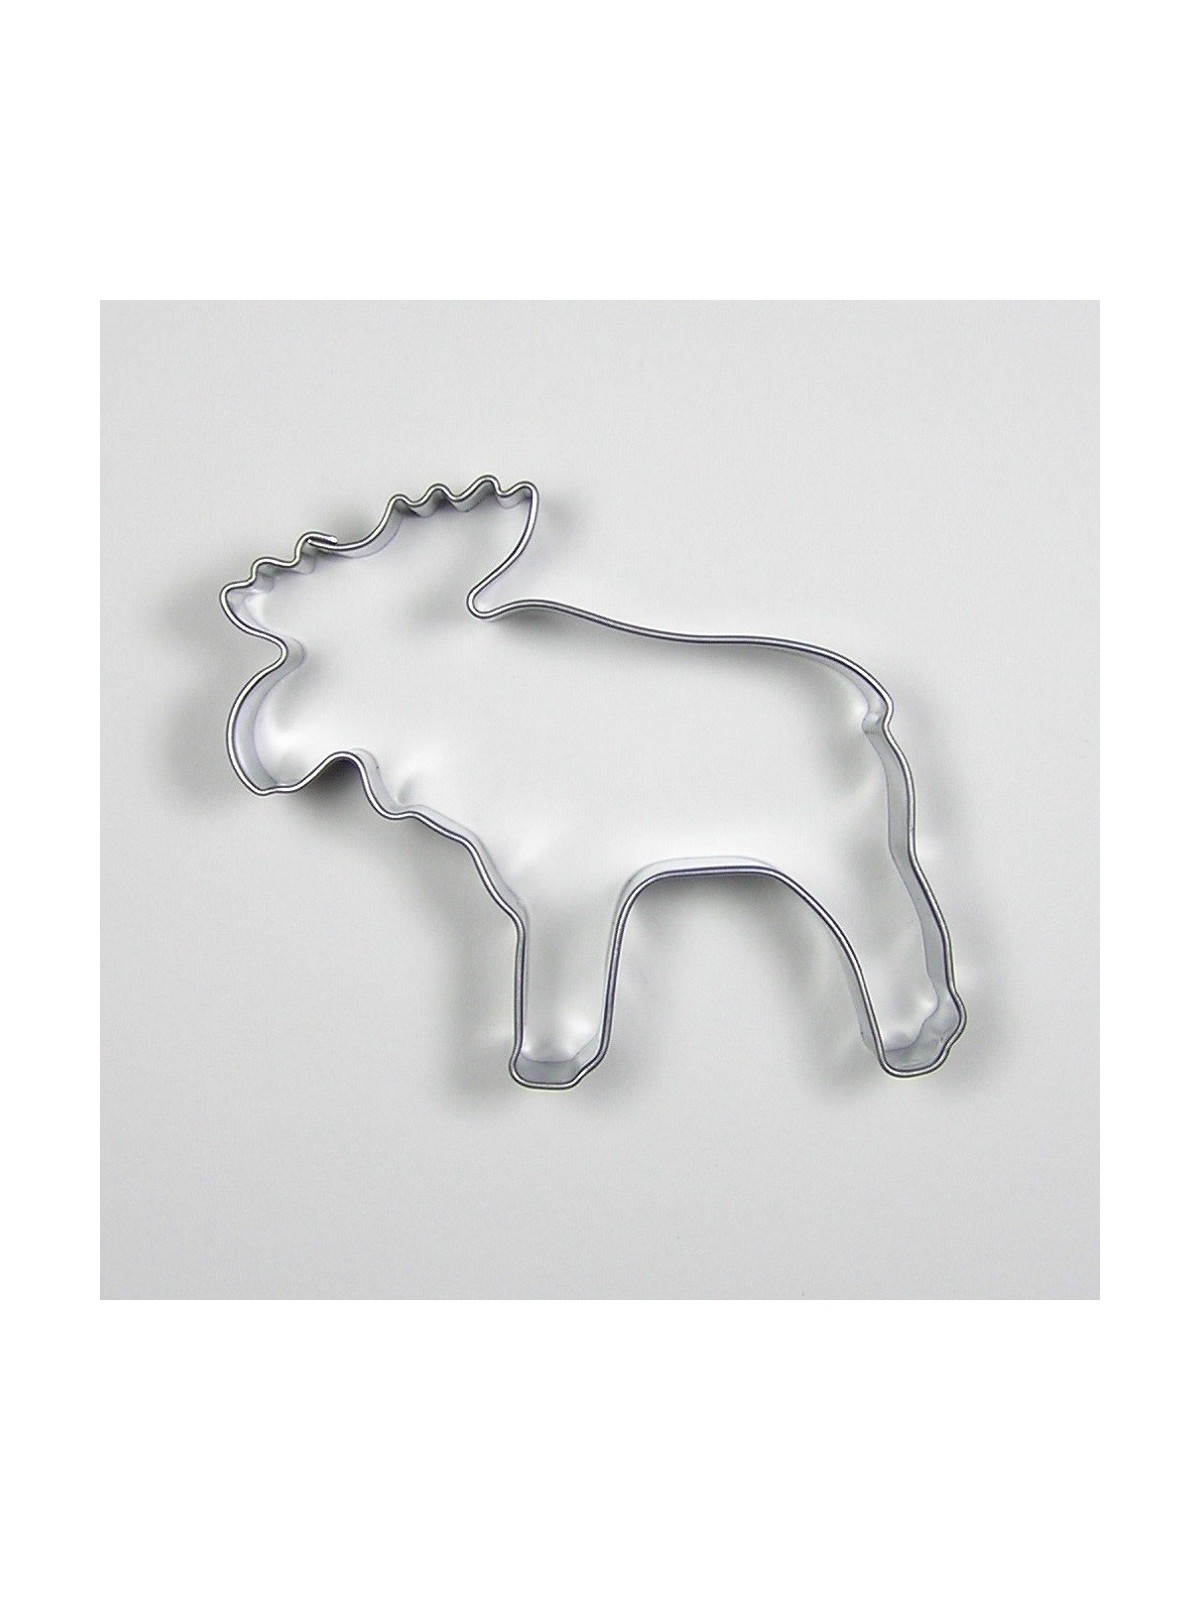 Stainless steel cutter - moose